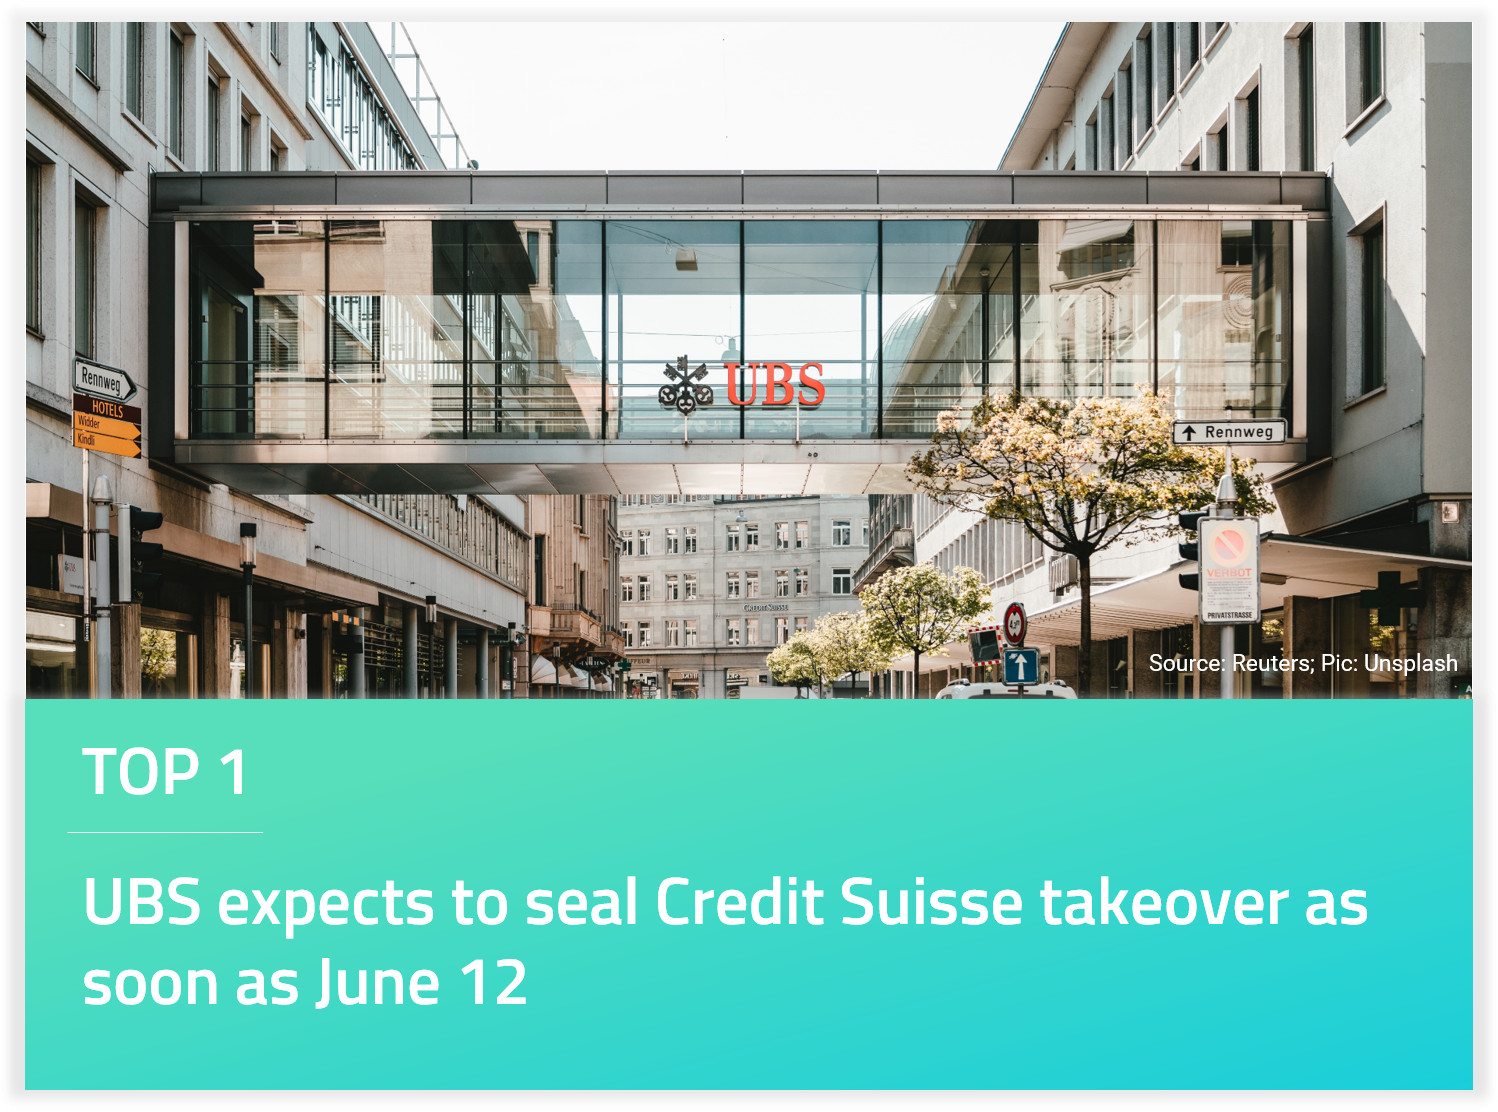 UBS expects to seal Credit Suisse takeover as soon as June 12